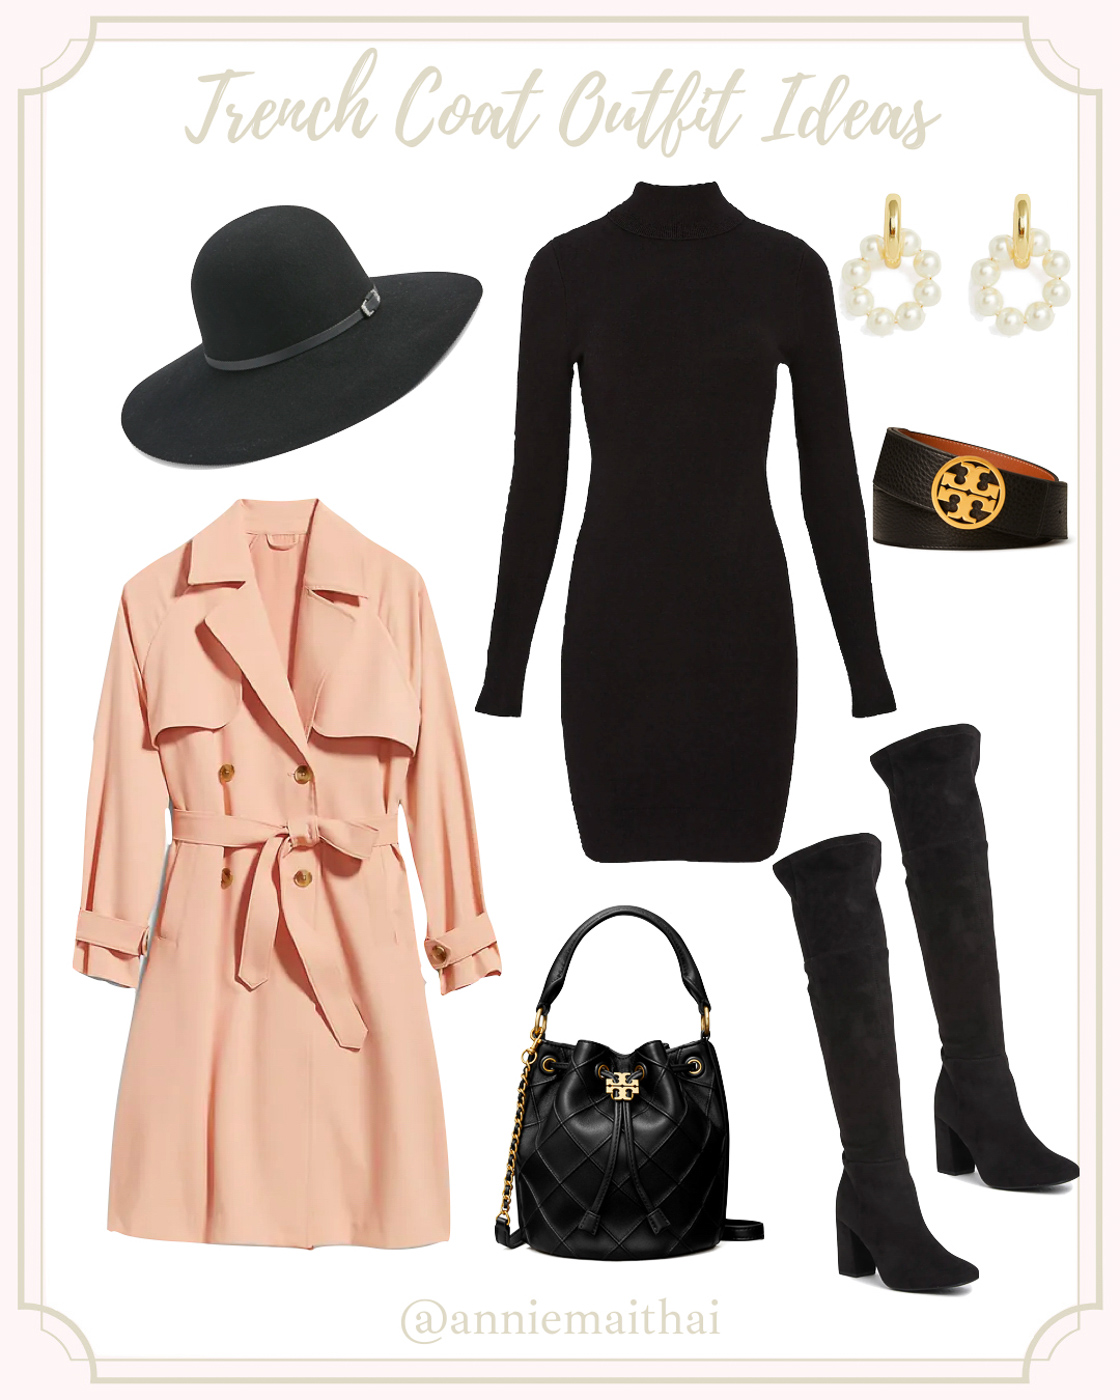 Trench Coat Outfit Ideas - Stylish Petite